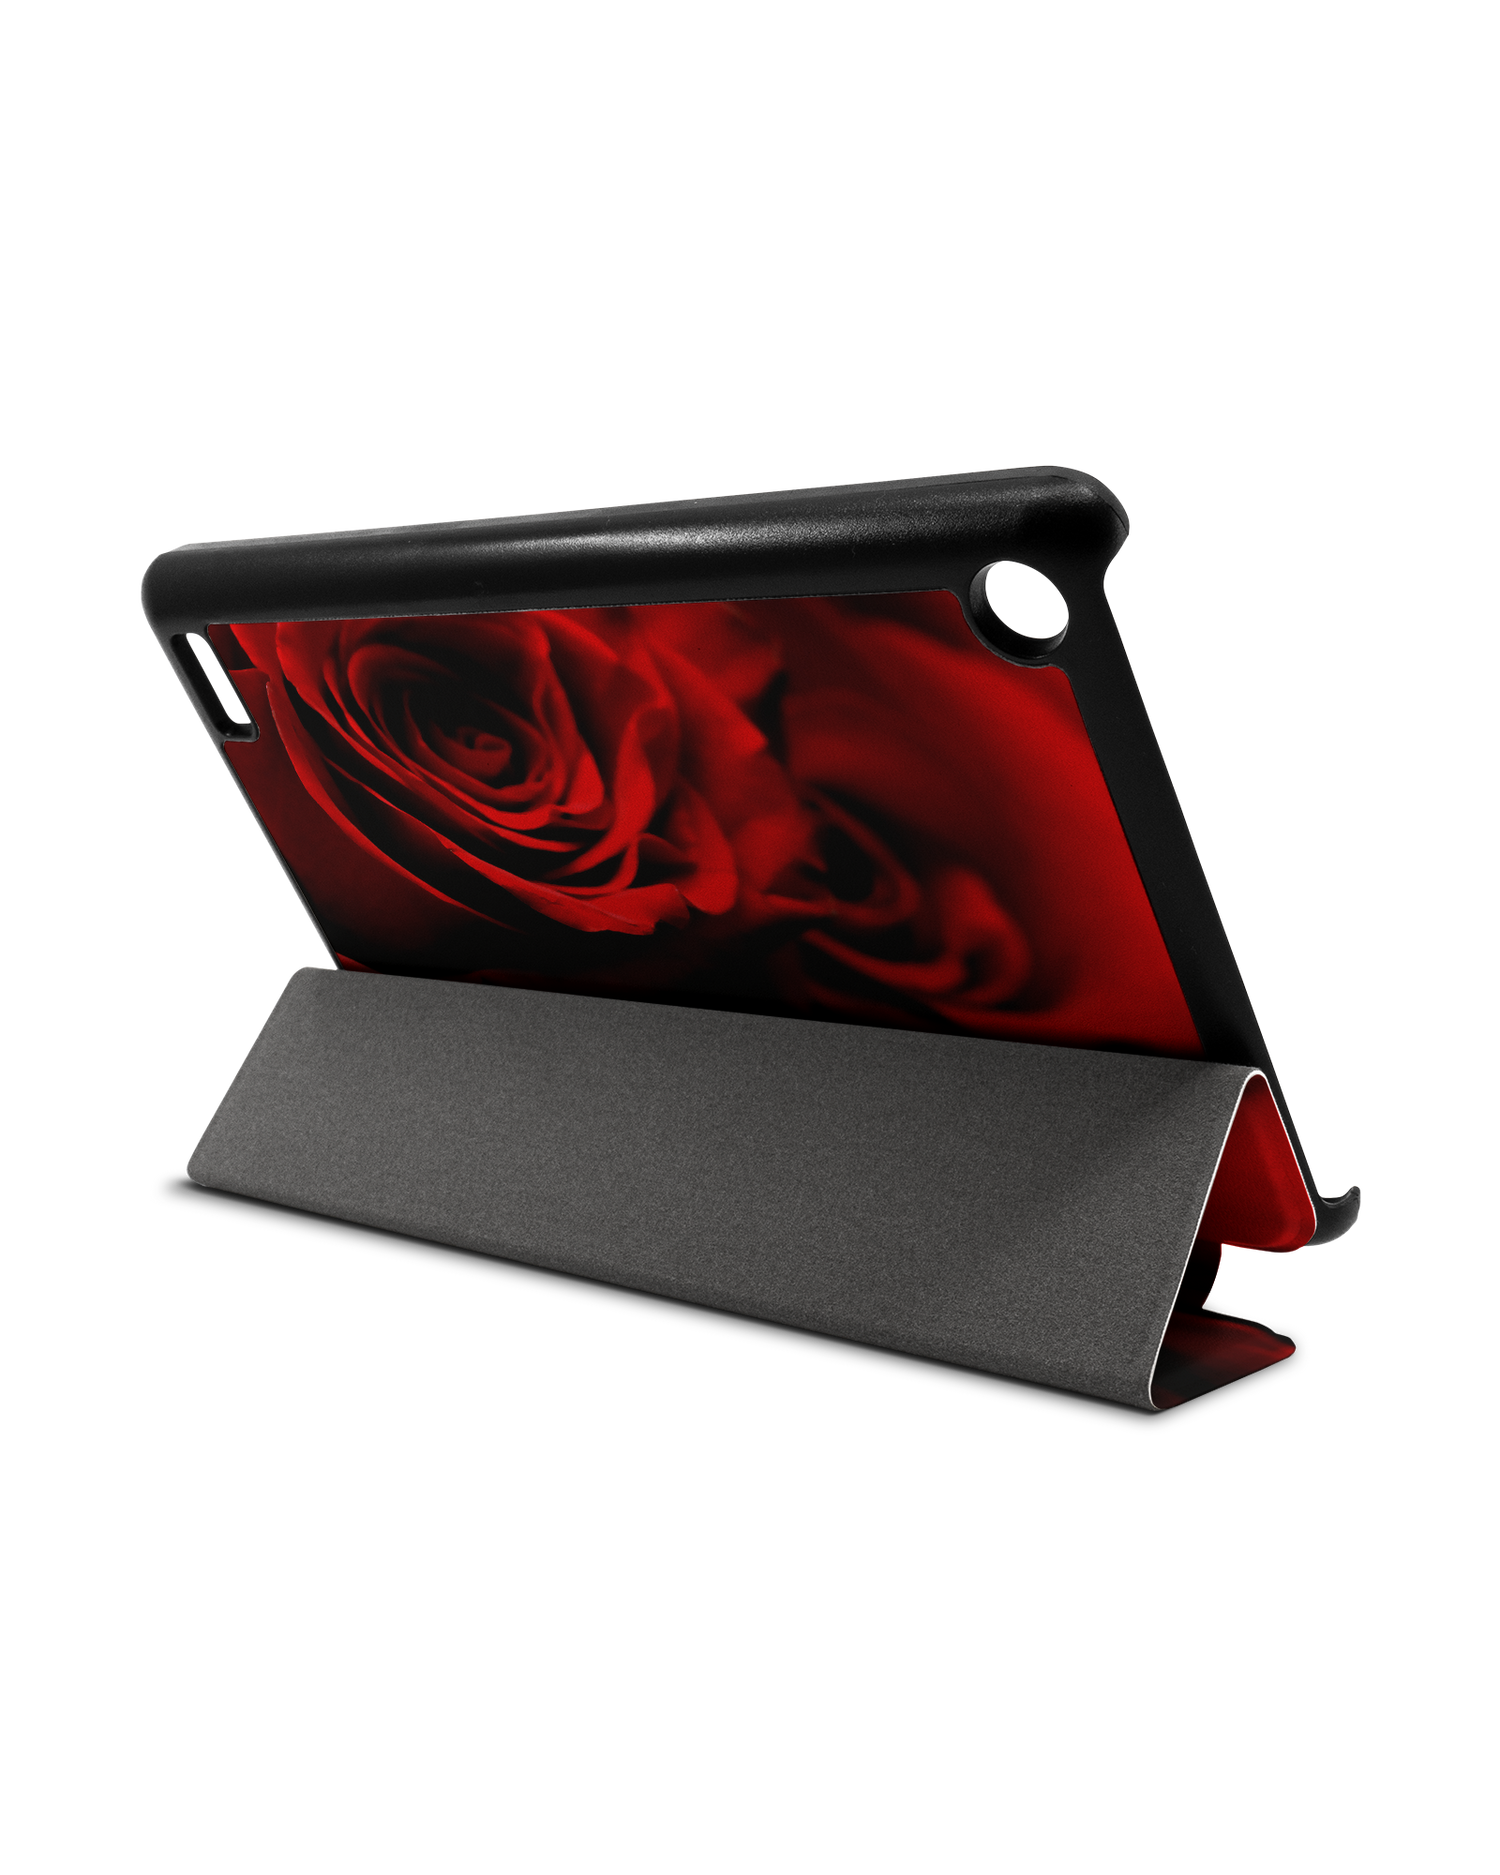 Red Roses Tablet Smart Case for Amazon Fire 7: Used as Stand